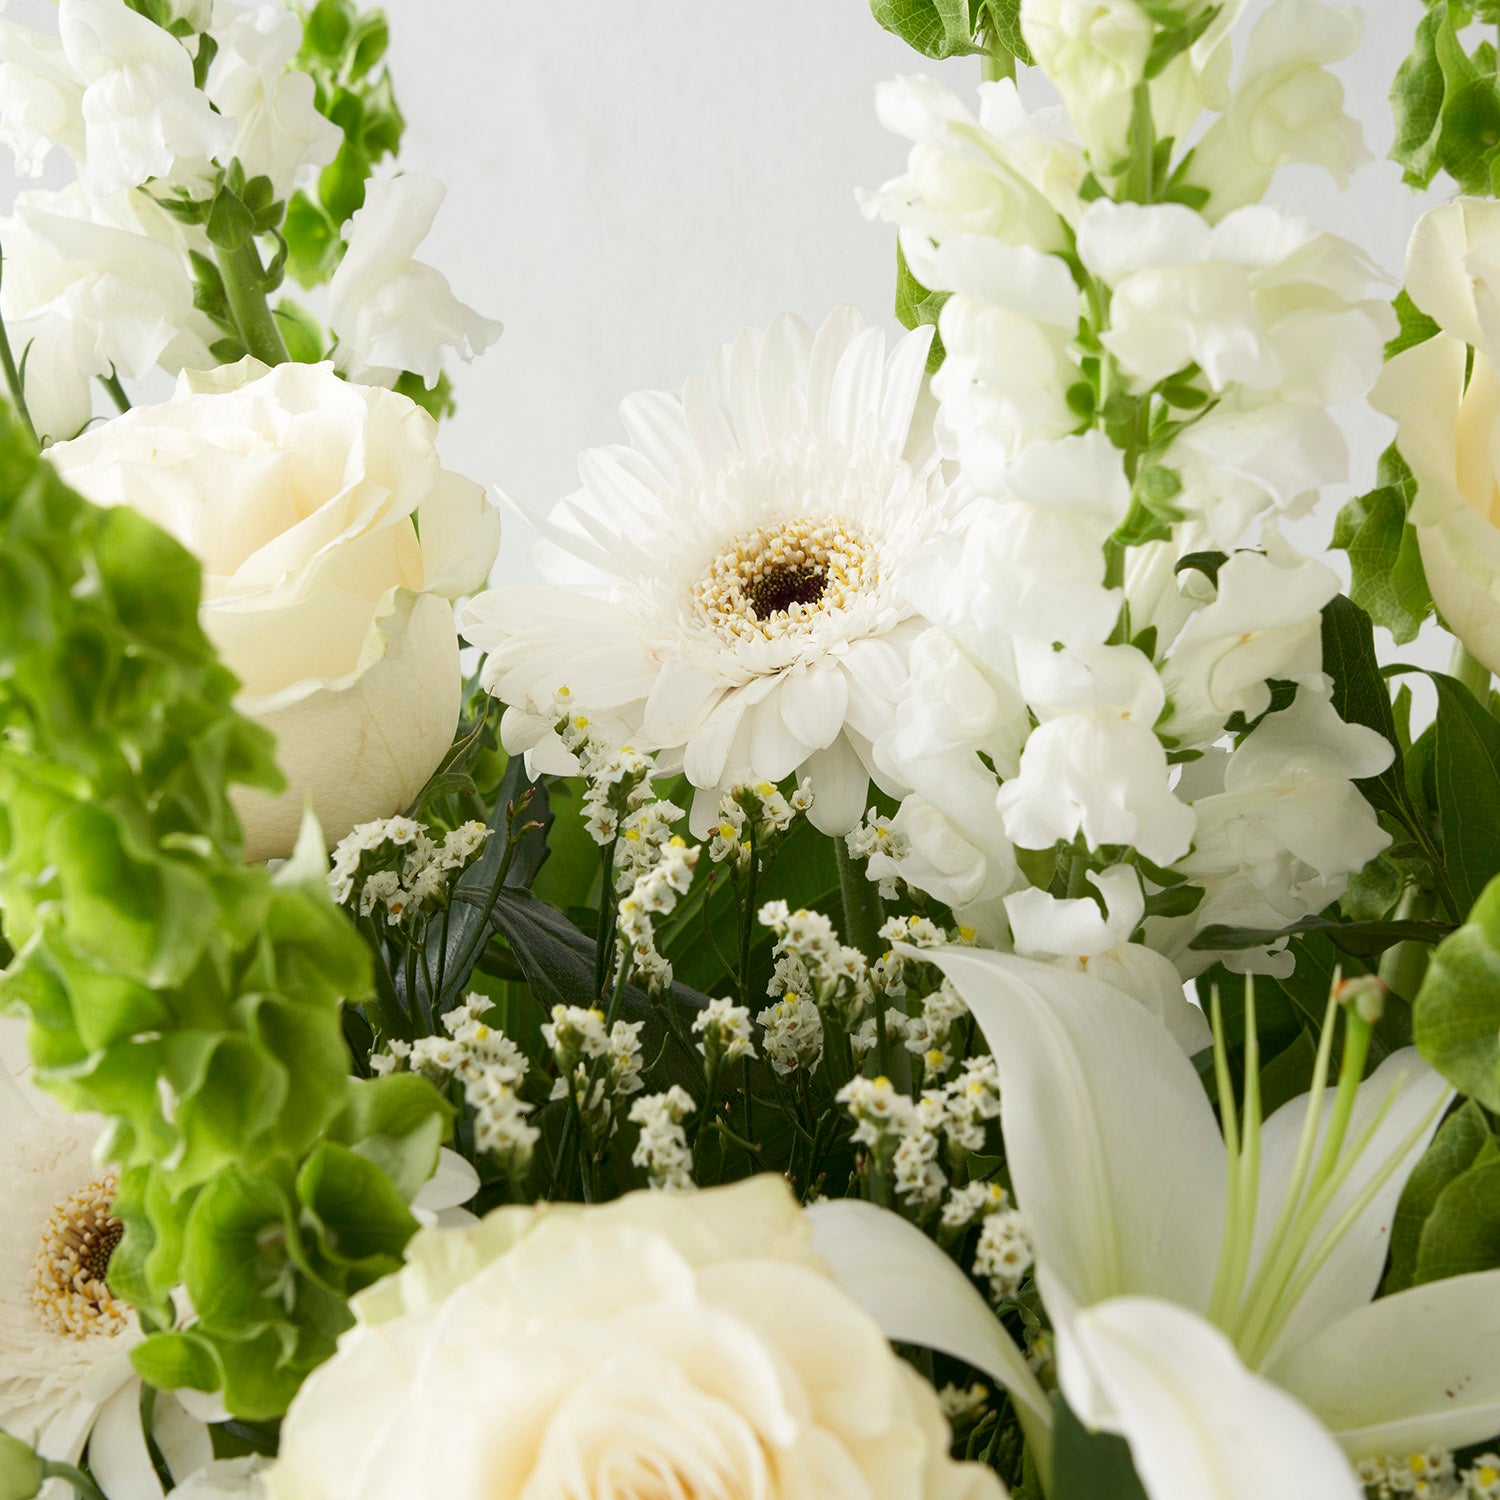 Closeup of all white and green flowers including gerberas, snapdragon, roses, and bells of ireland.